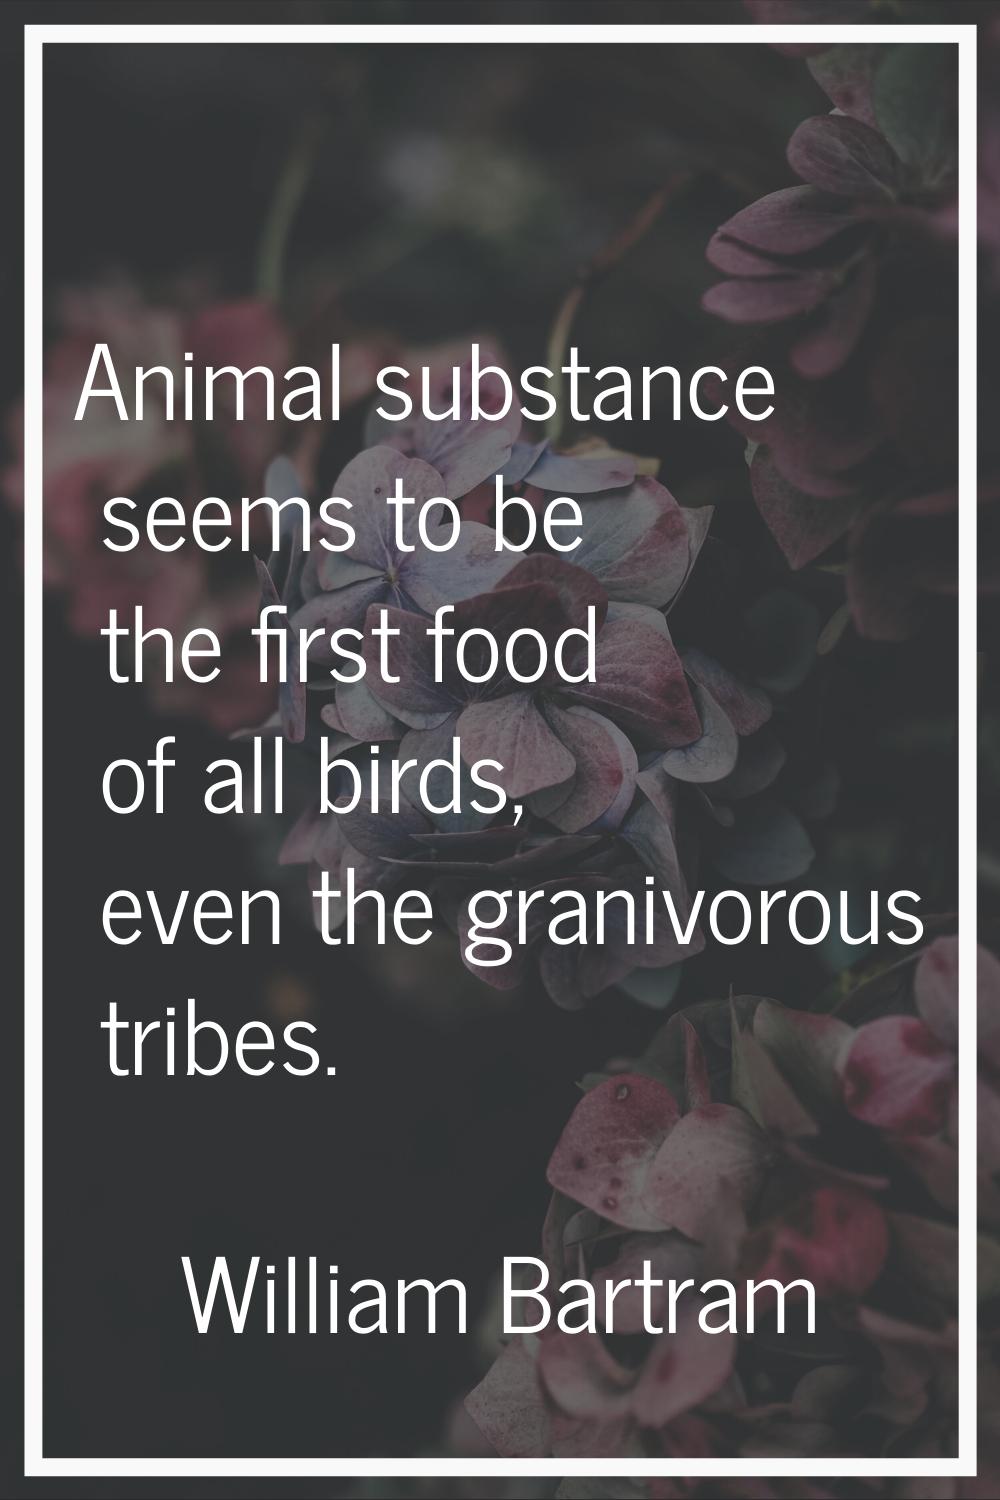 Animal substance seems to be the first food of all birds, even the granivorous tribes.